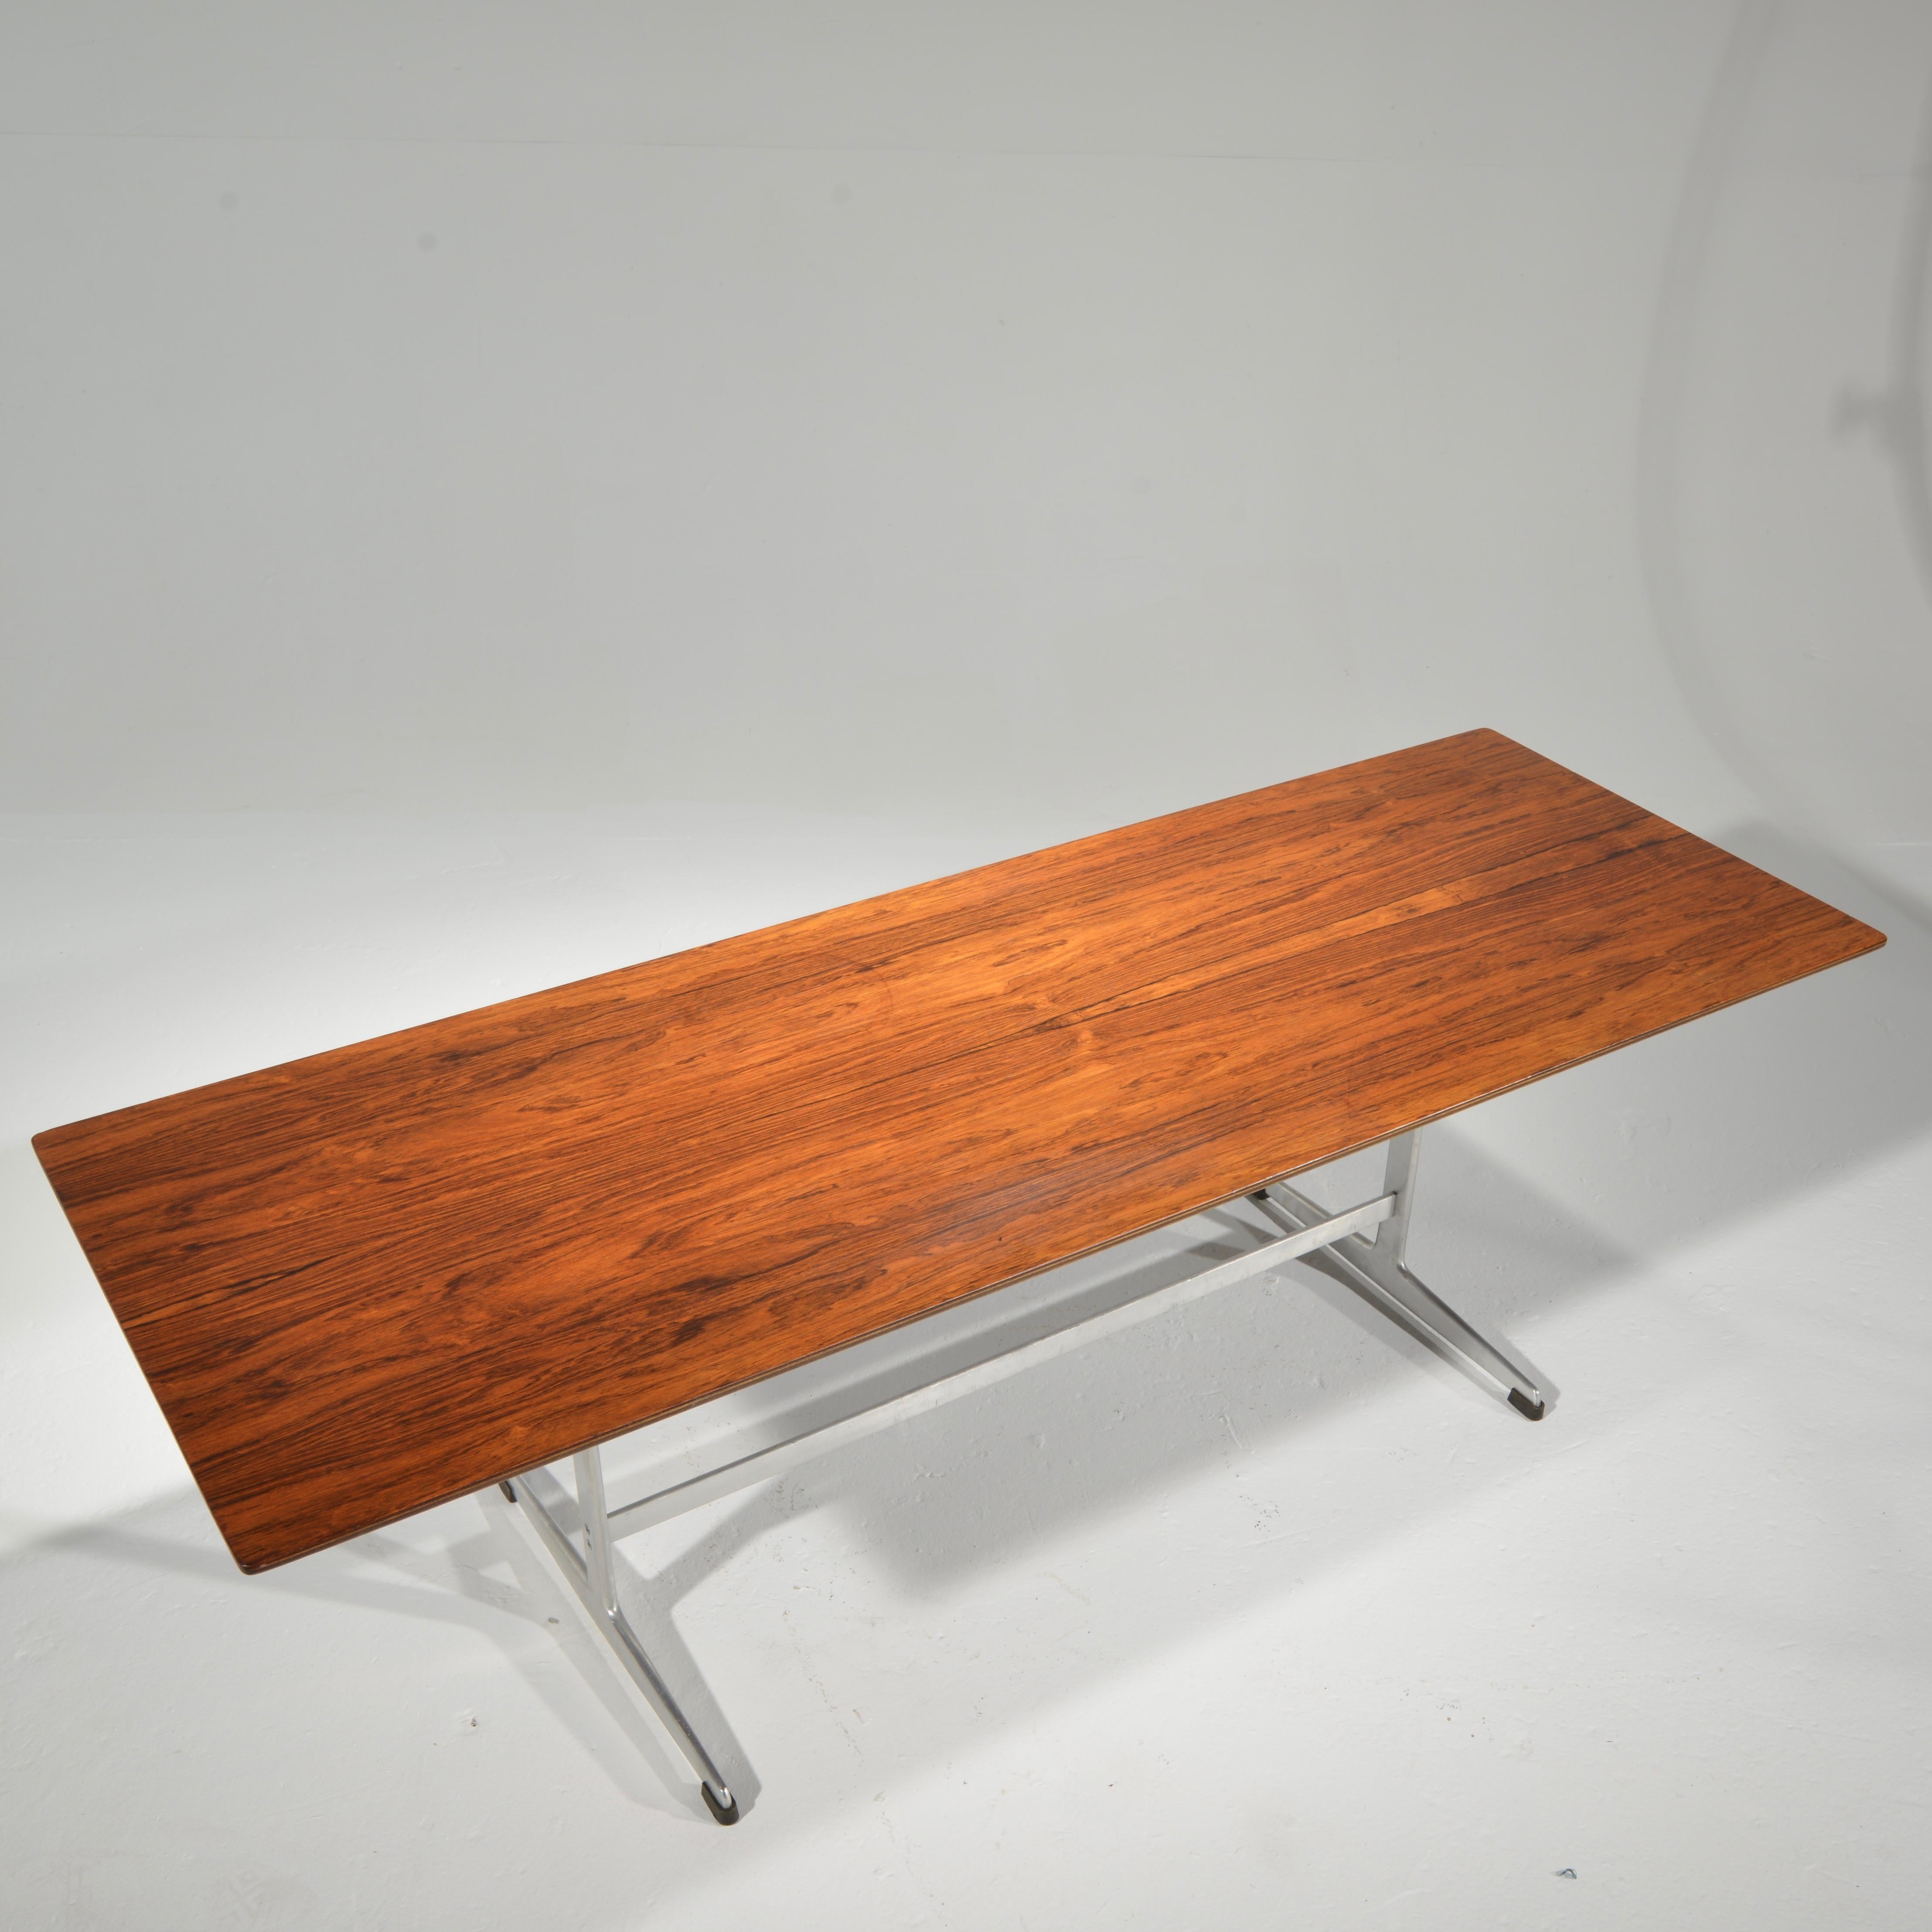 Rare Arne Jacobsen rosewood coffee table produced by Fritz Hansen.